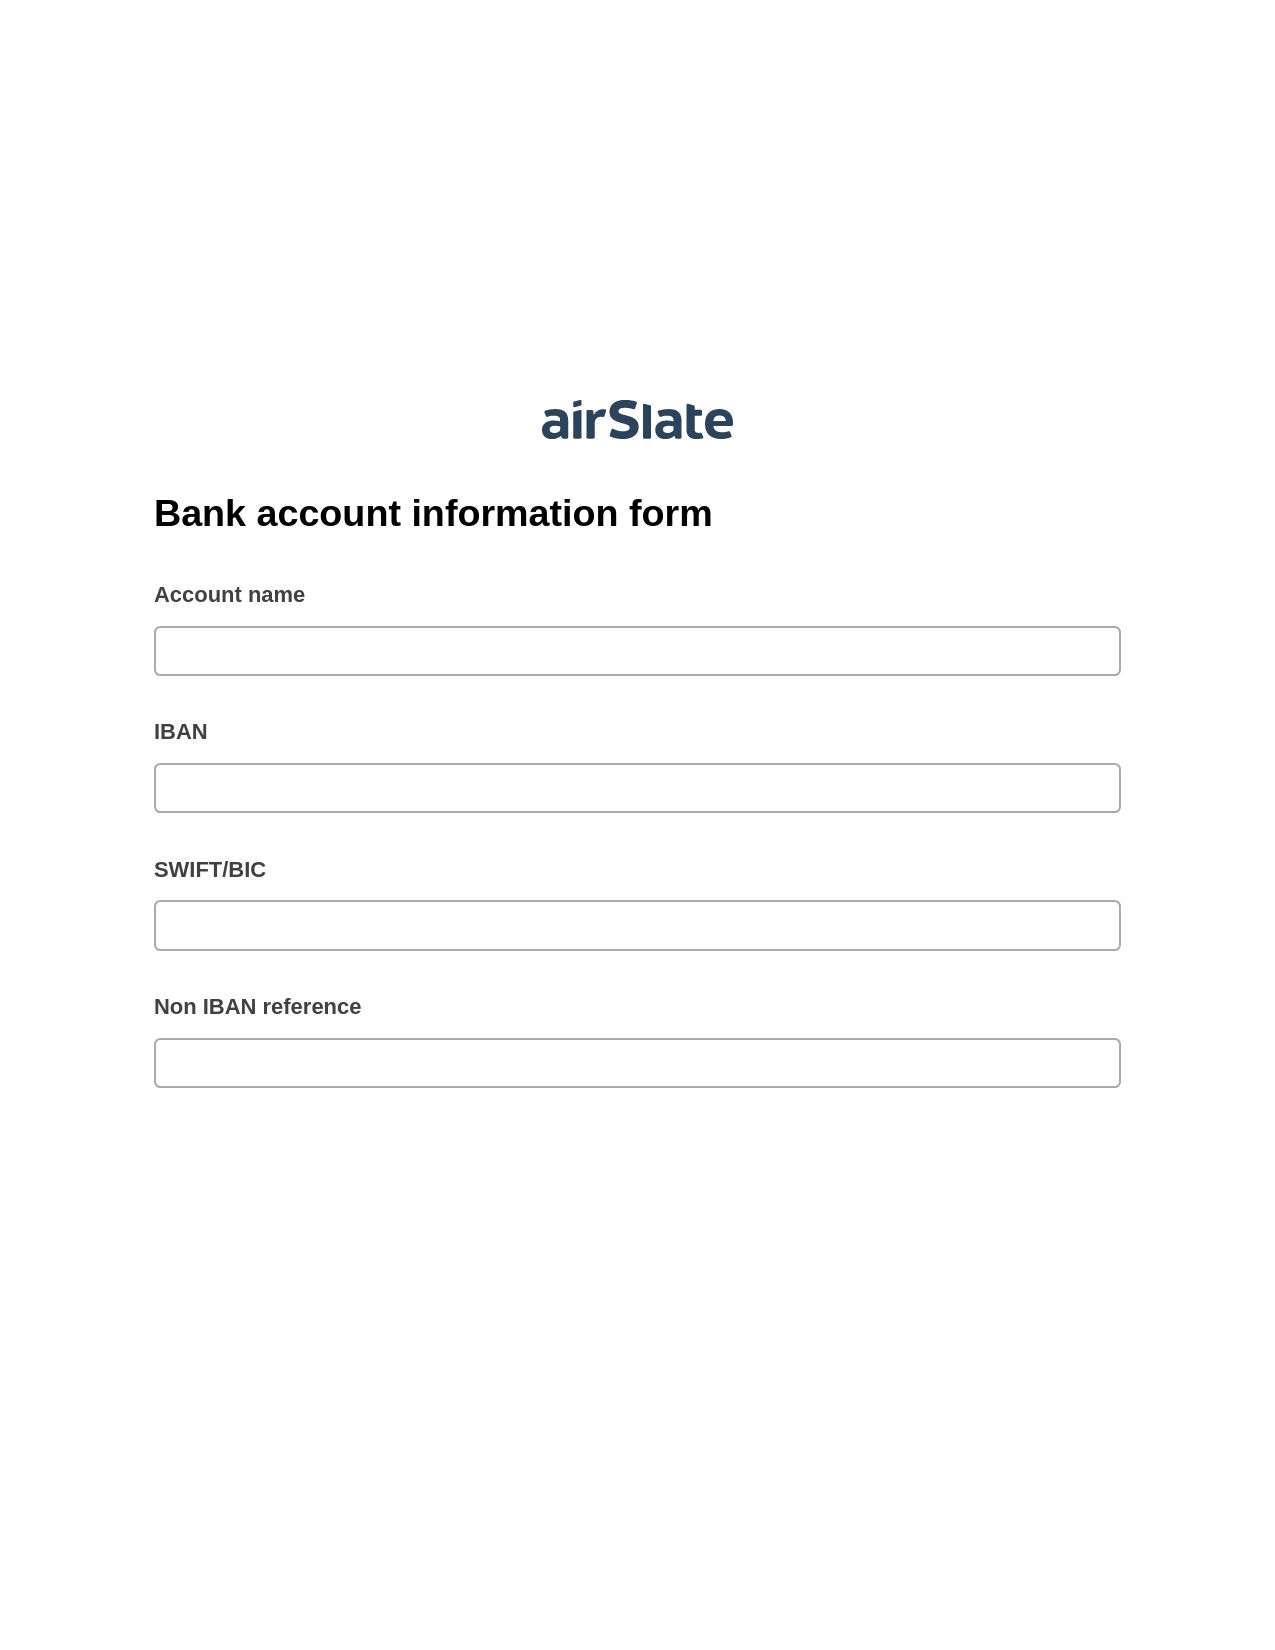 Multirole Bank account information form Pre-fill Slate from MS Dynamics 365 Records Bot, Create slate from another Flow Bot, Export to Excel 365 Bot